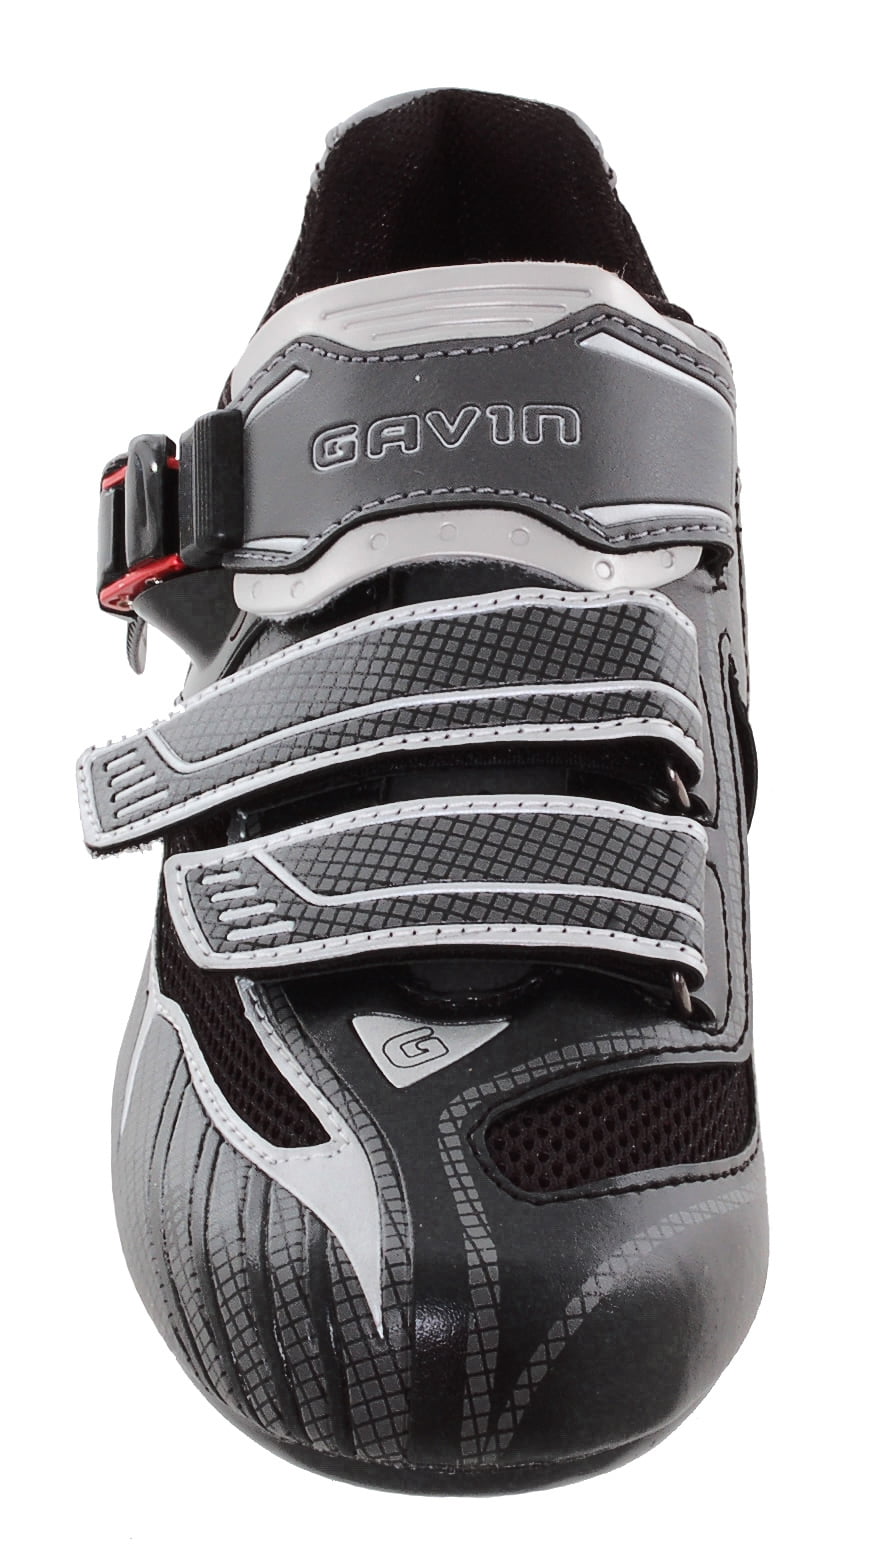 3 Bolt Road Cleat Compatible Gavin Pro Road Cycling Shoe Quick Lace